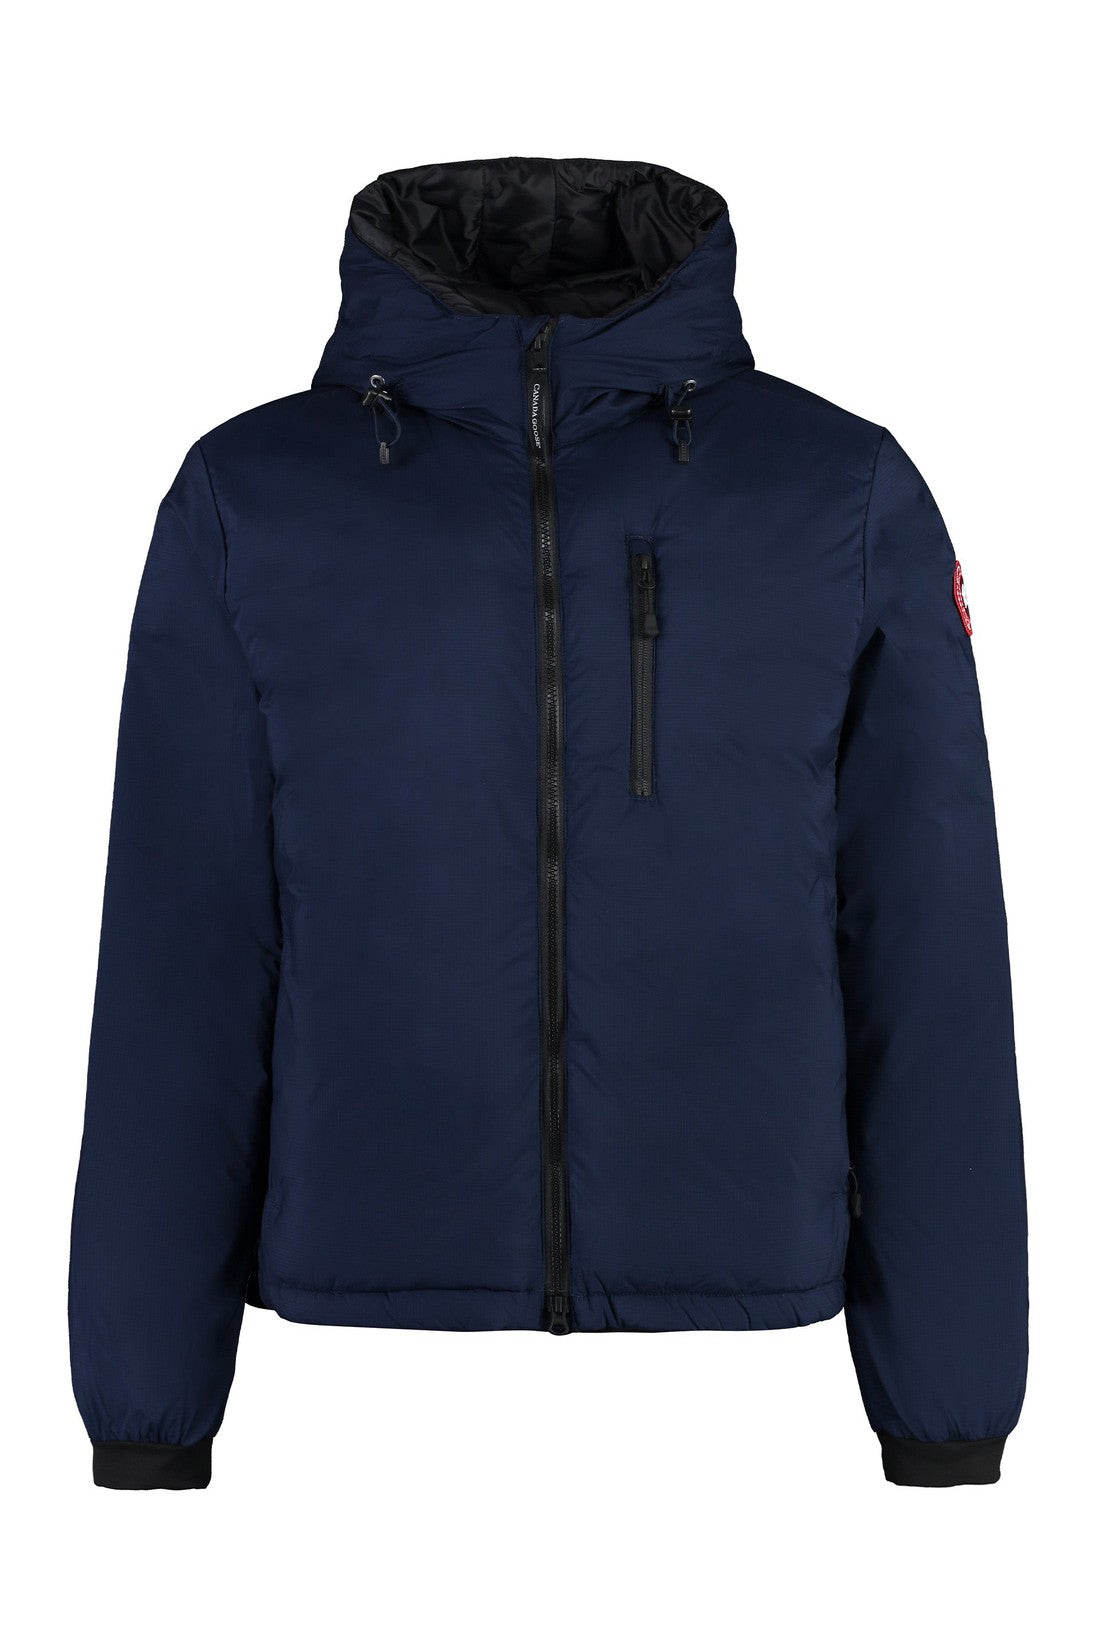 Canada Goose-OUTLET-SALE-Lodge techno fabric padded jacket-ARCHIVIST